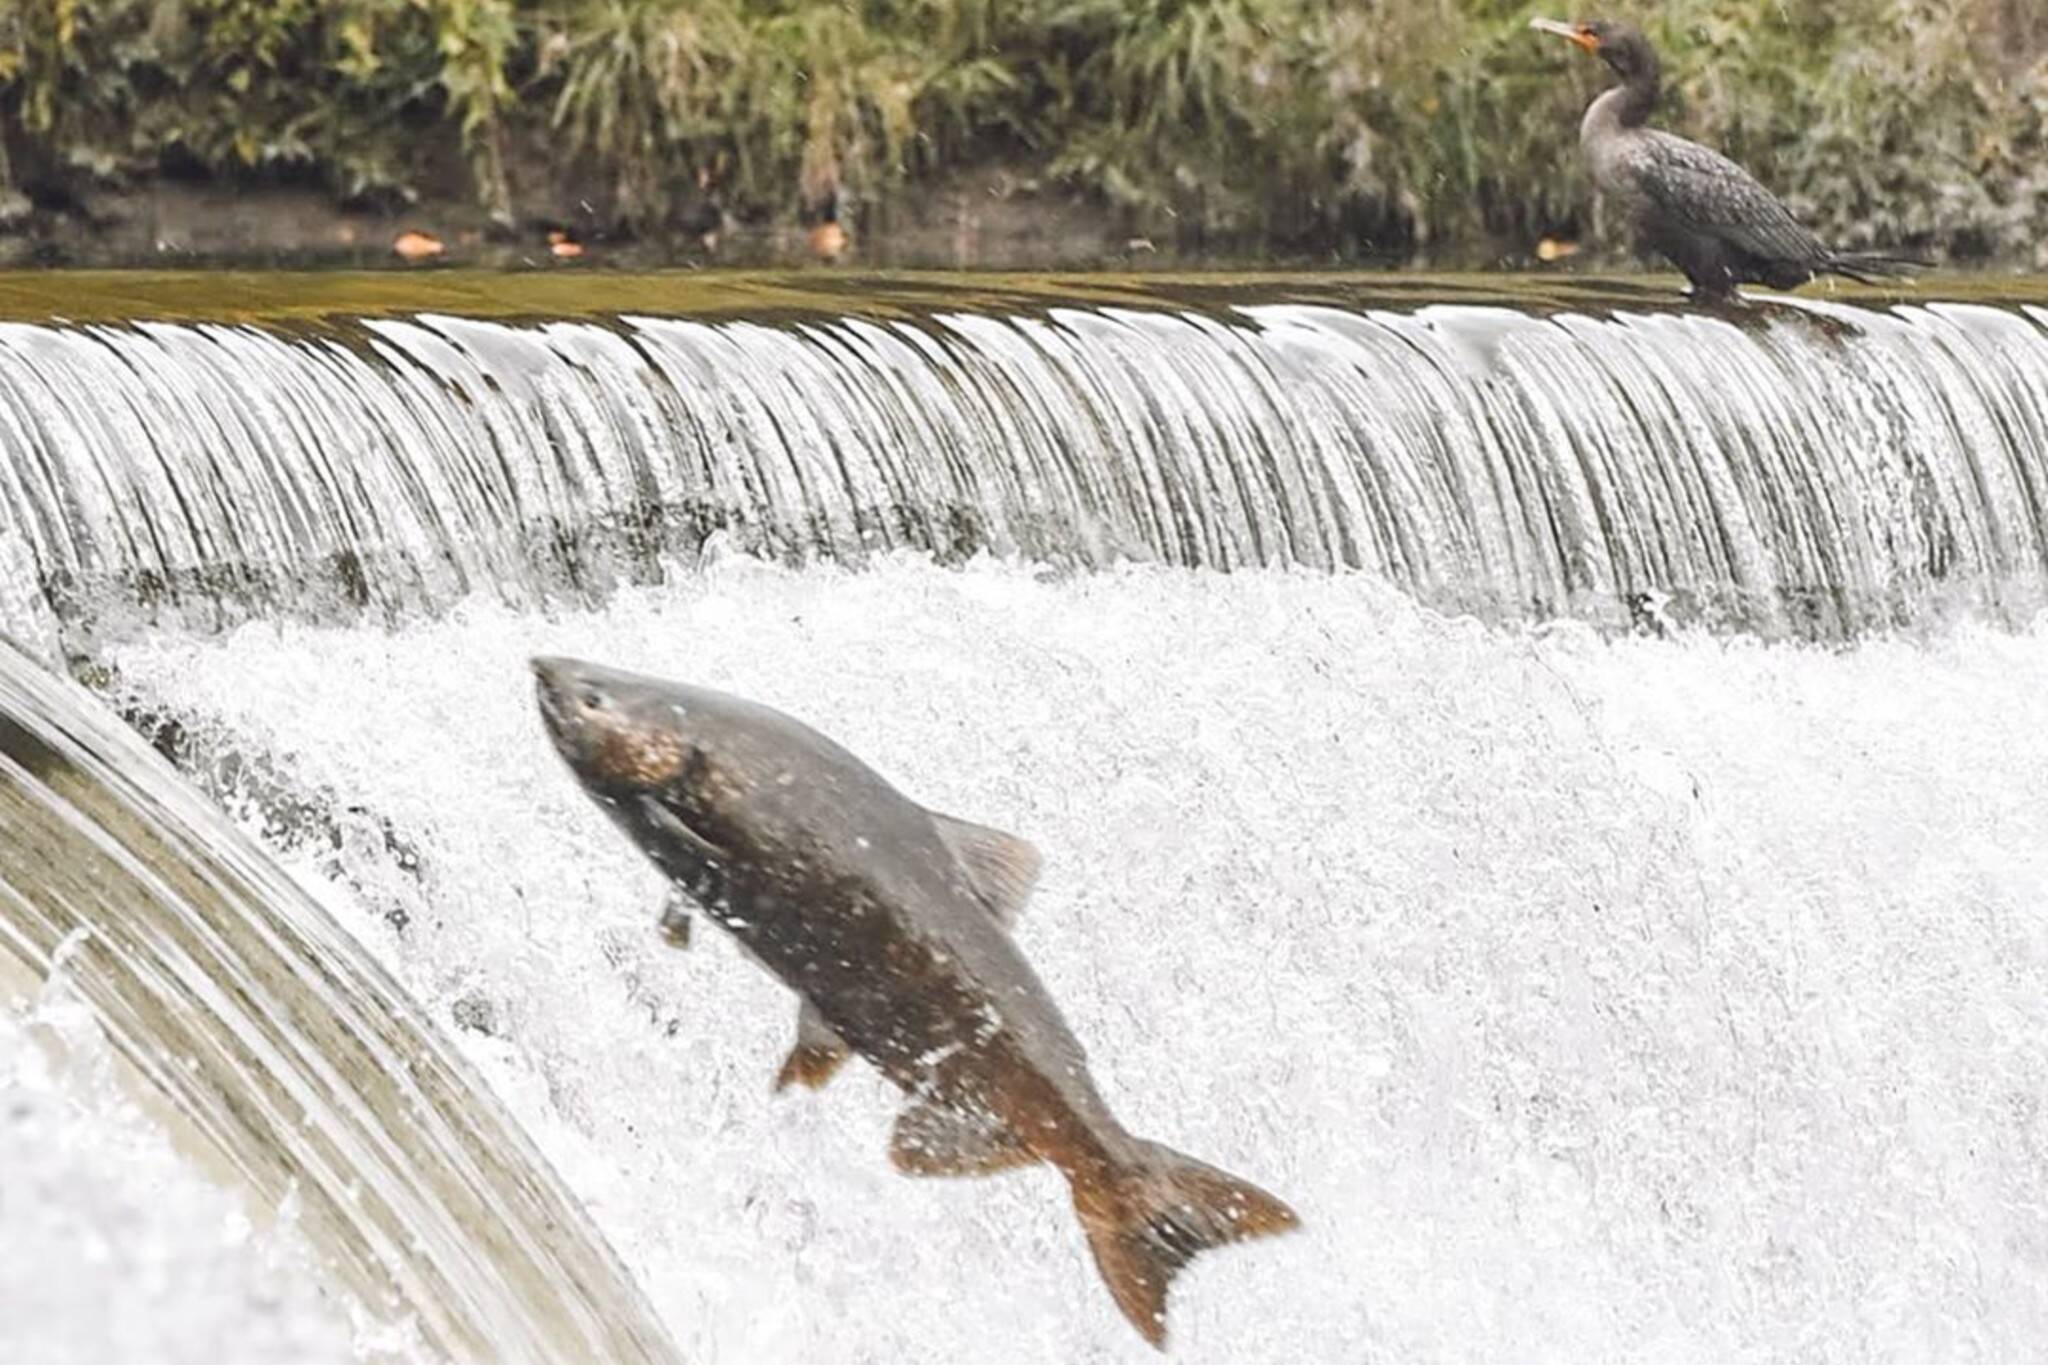 Toronto is totally obsessed with watching salmon jump in the Humber River